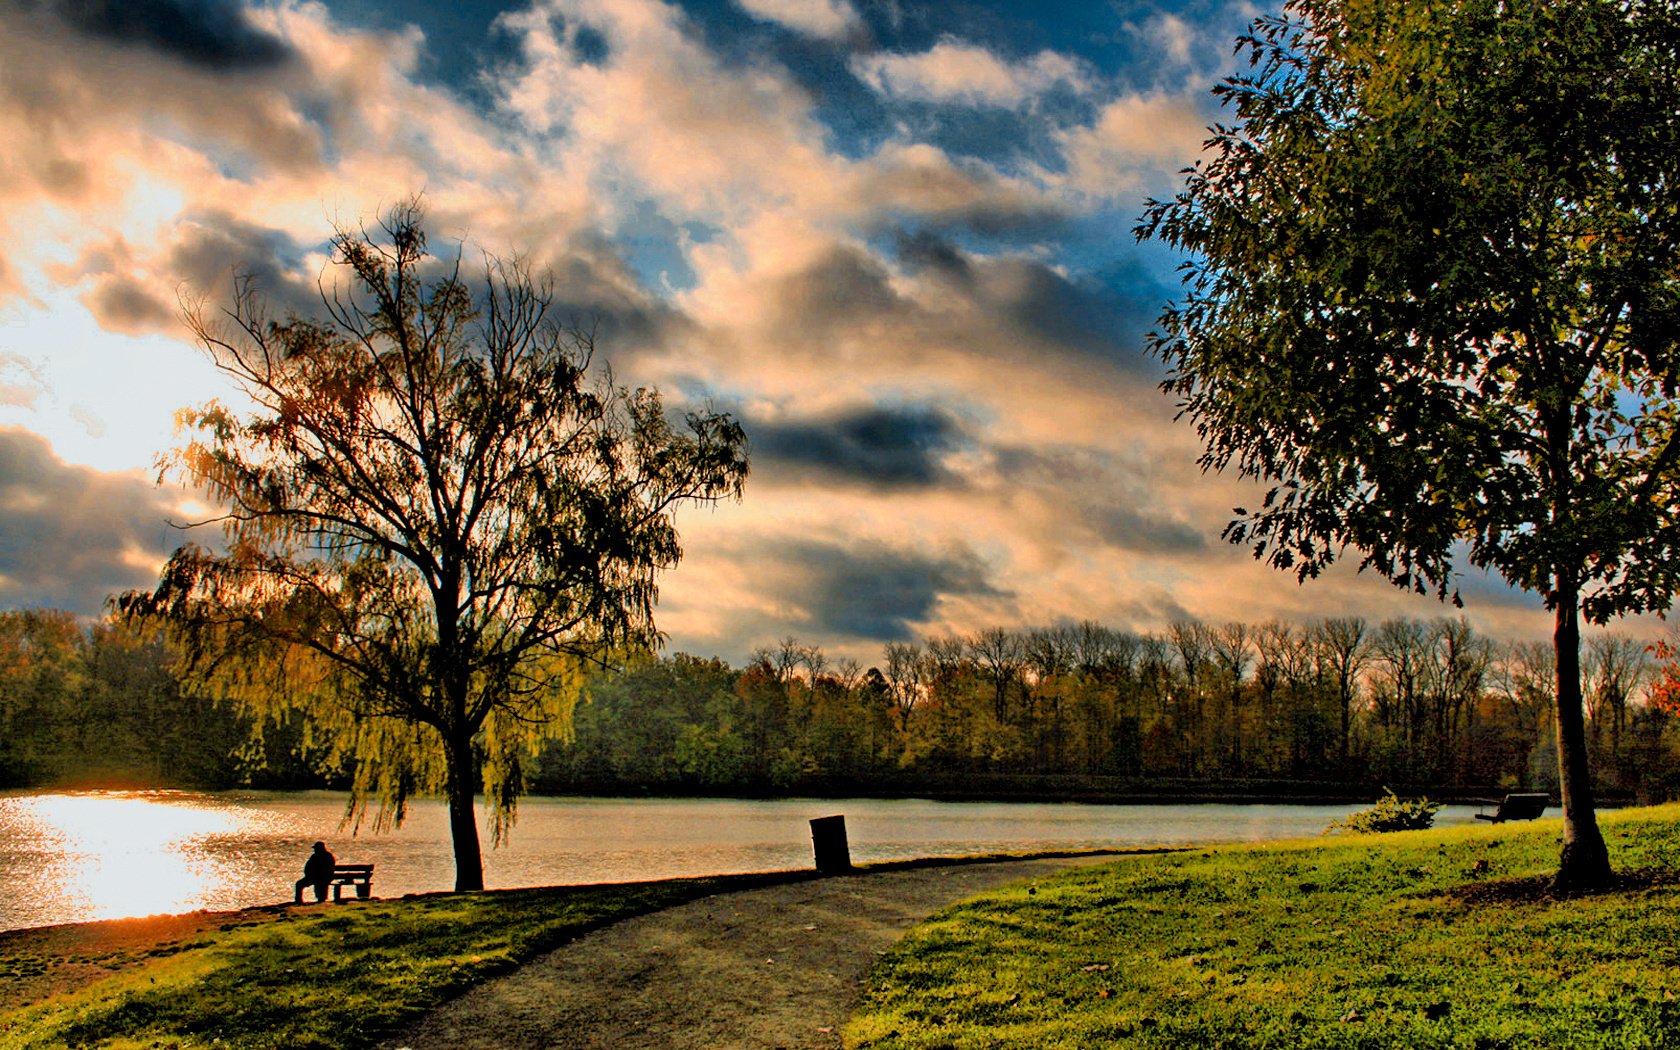 clouds, Landscapes, Trees, Paths, Bench, Lakes Wallpaper